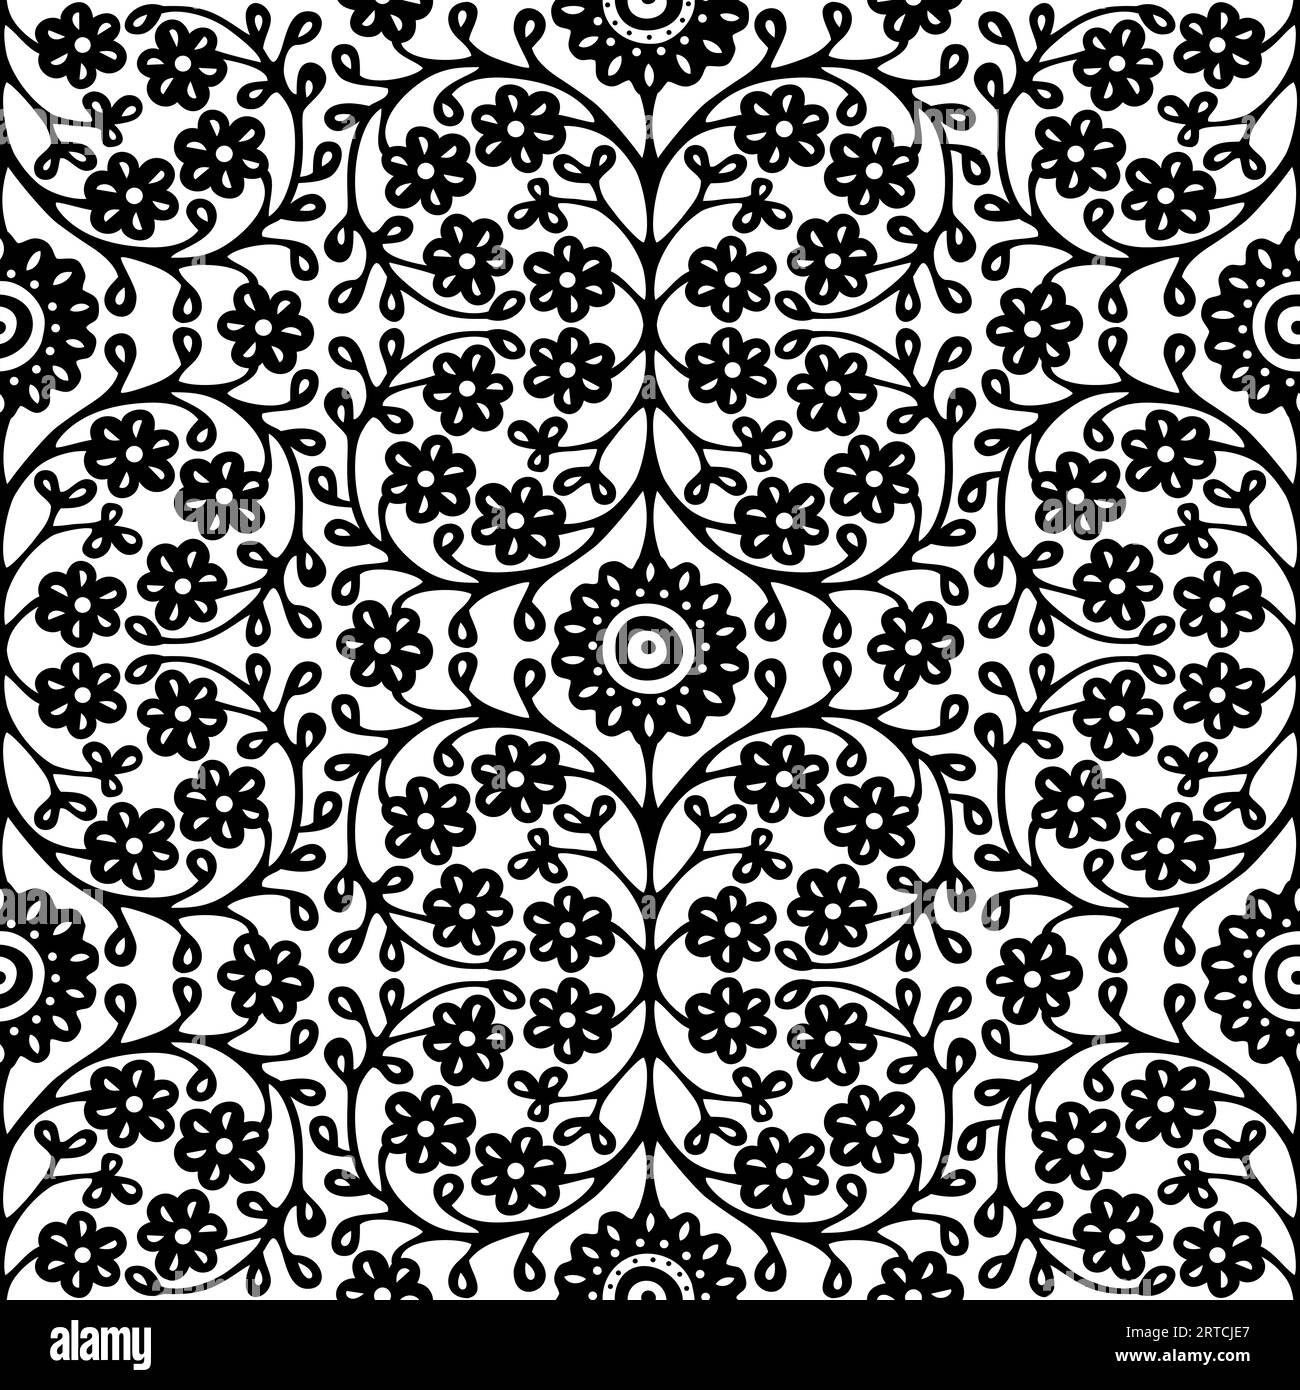 Seamless pattern with Indian ethnic flowers in black and white Stock Photo